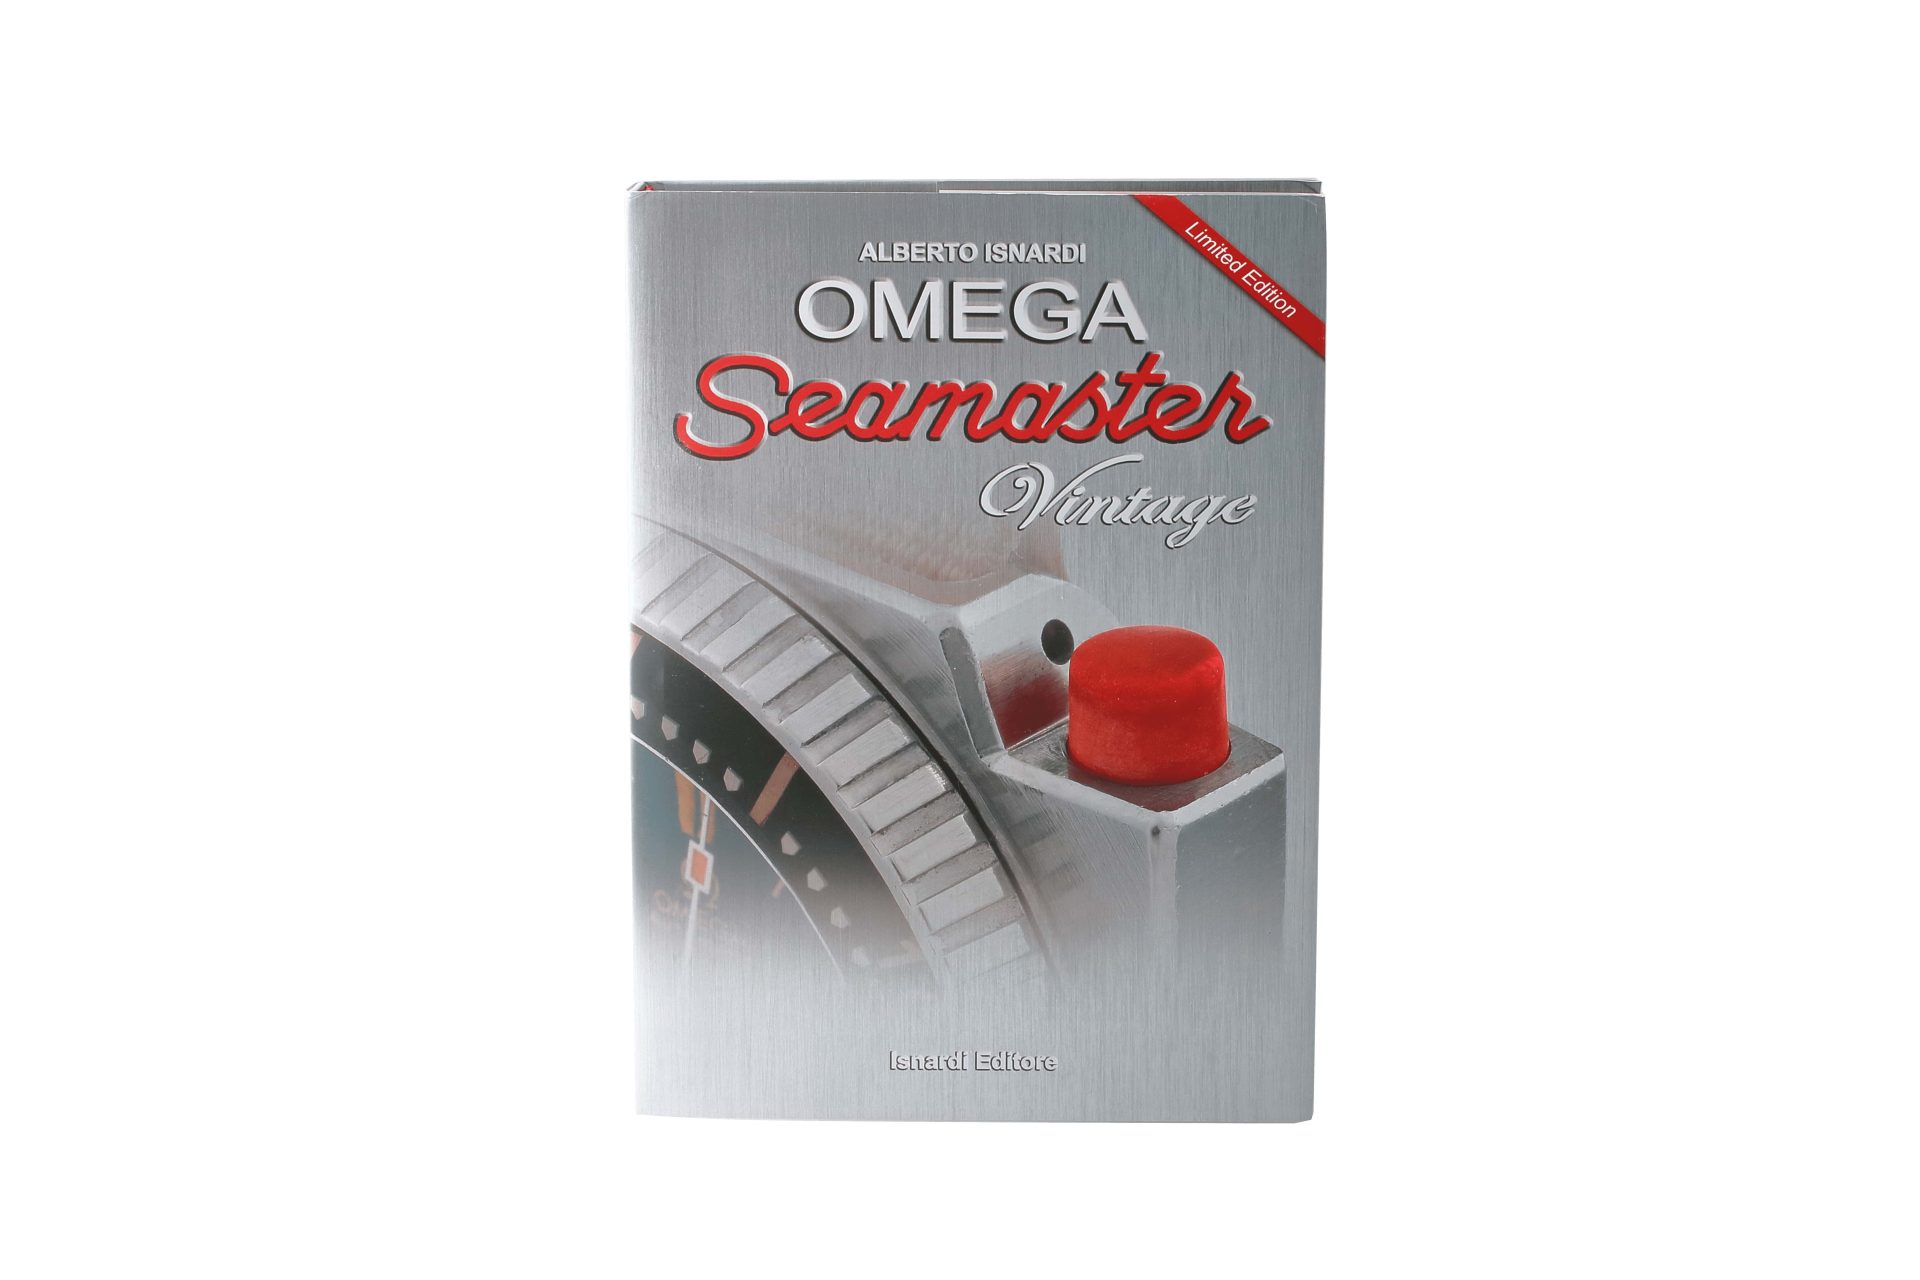 Omega Seamaster Vintage Watch Book by Alberto Isnardi SIGNED - Rare Watch Parts